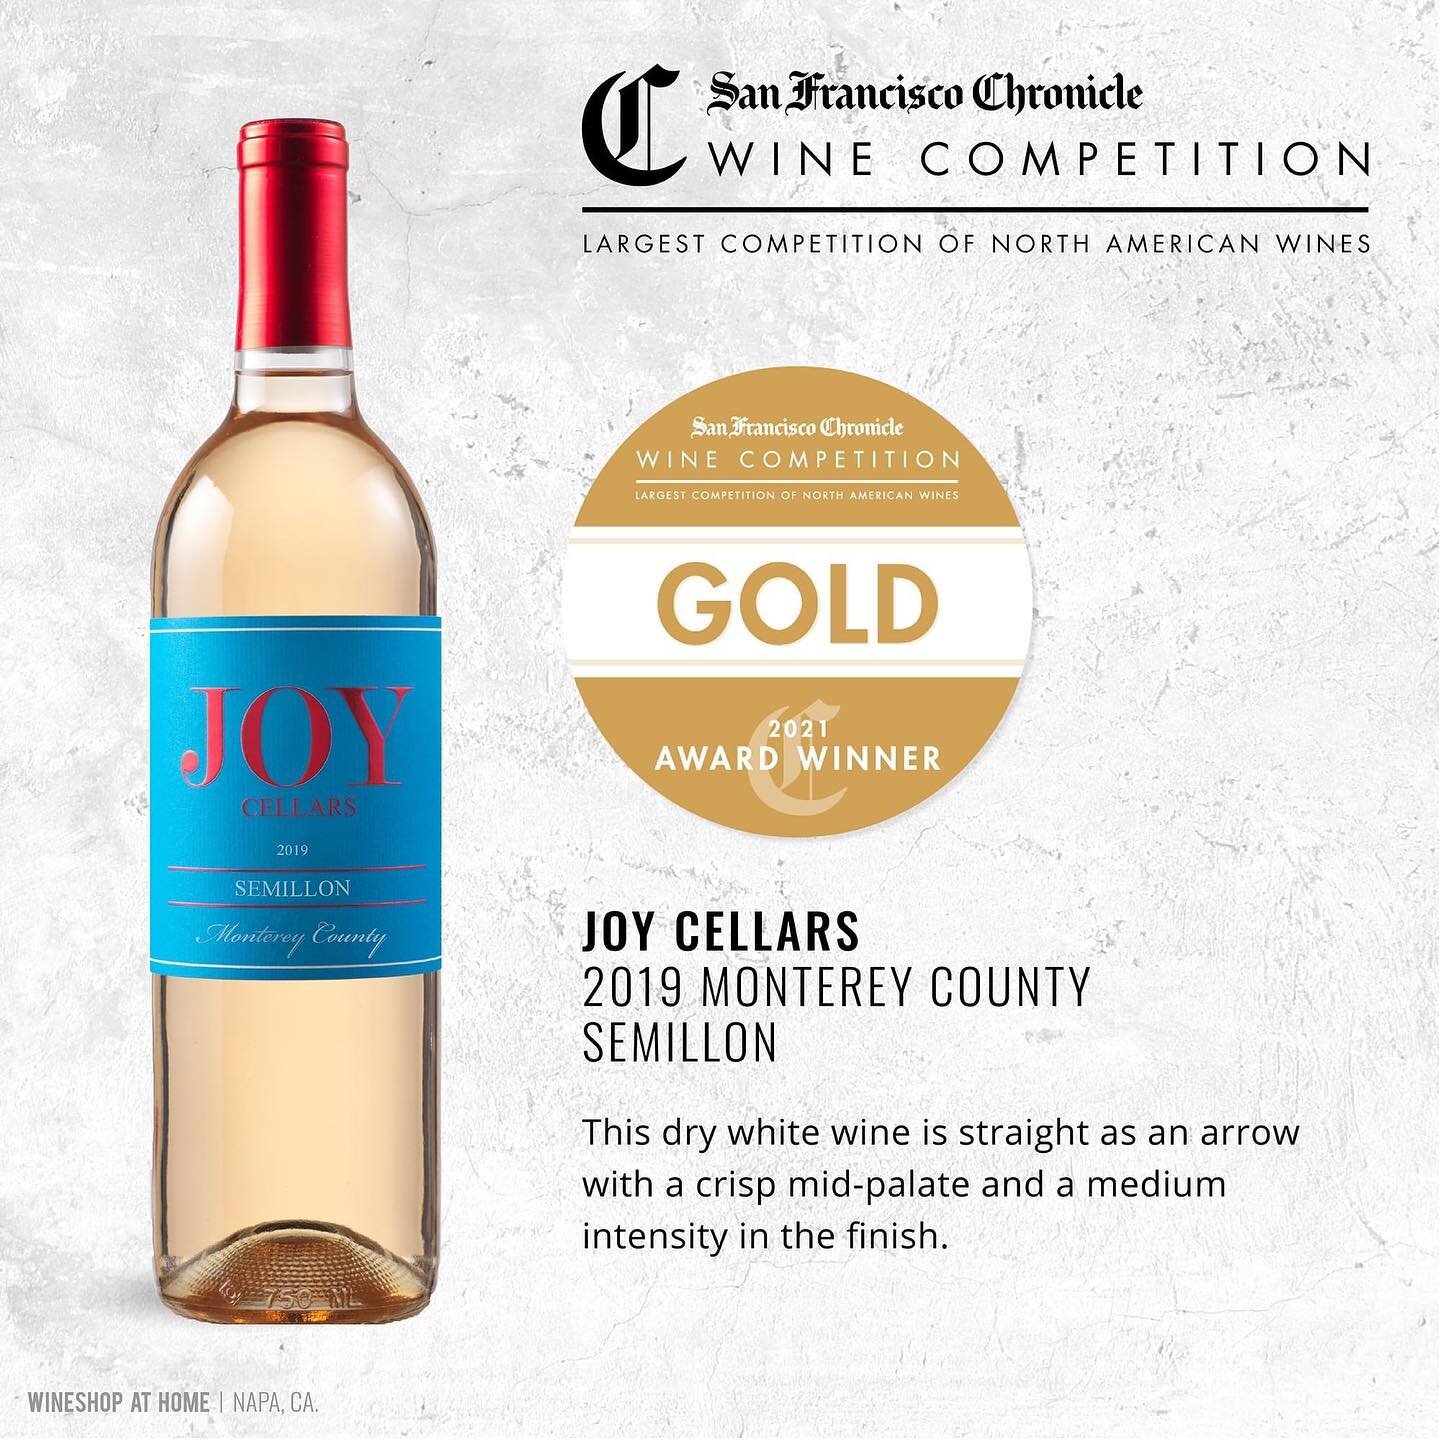 🍷 The results are in! We're raising a glass in celebration of 7 awards from the 2021 San Francisco Chronicle Wine Competition, including a Gold Medal for our Joy Cellars 2019 Semillon from Monterey County. 🏆 http://bit.ly/Joy19Semillon

We also too